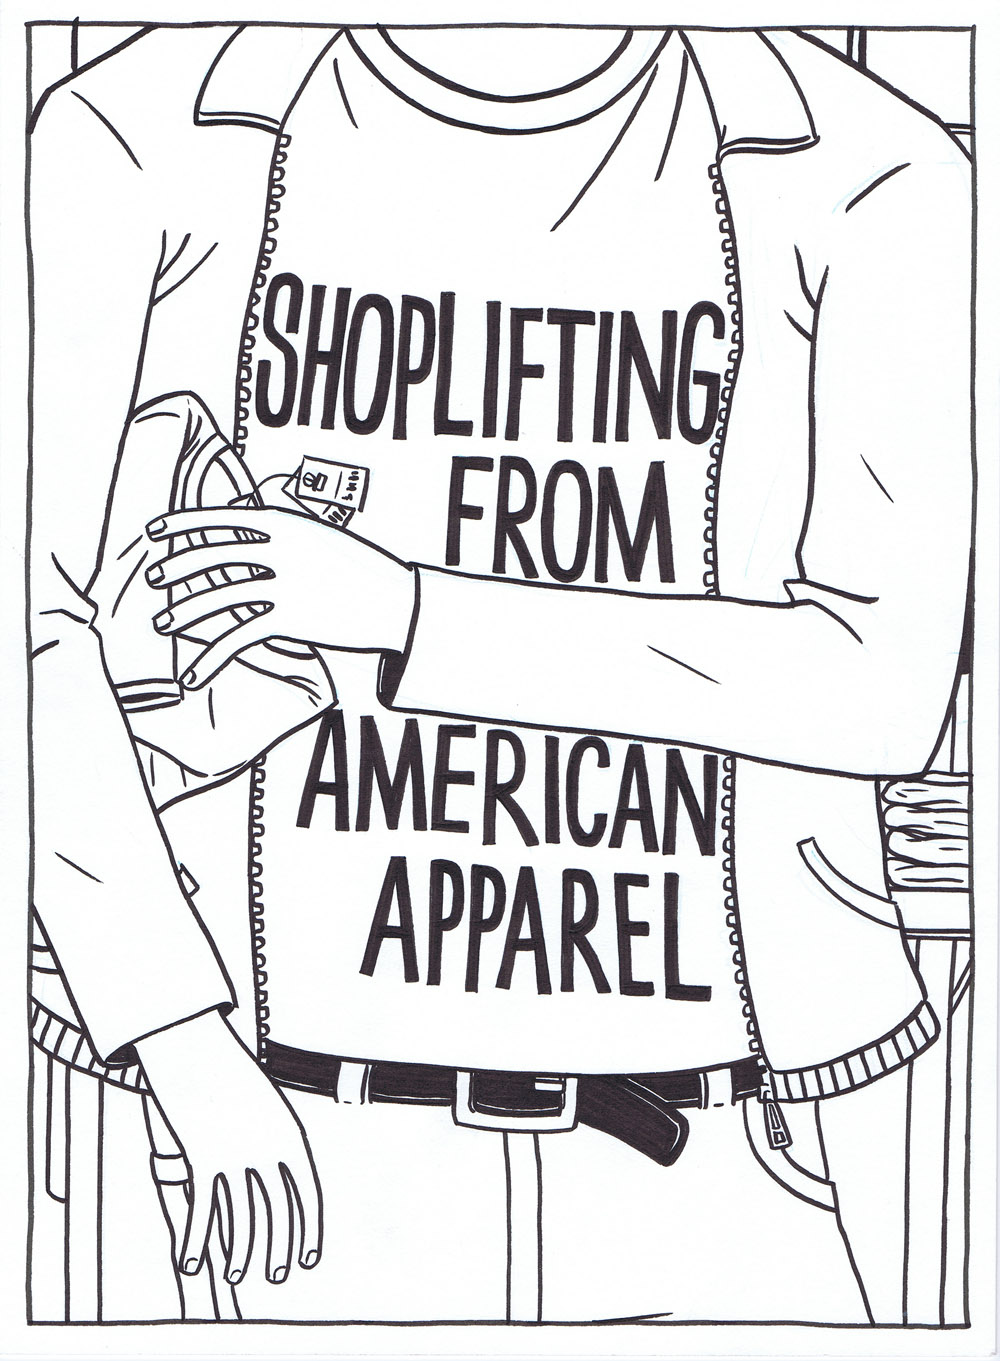 Shoplifting from American Apparel - film poster